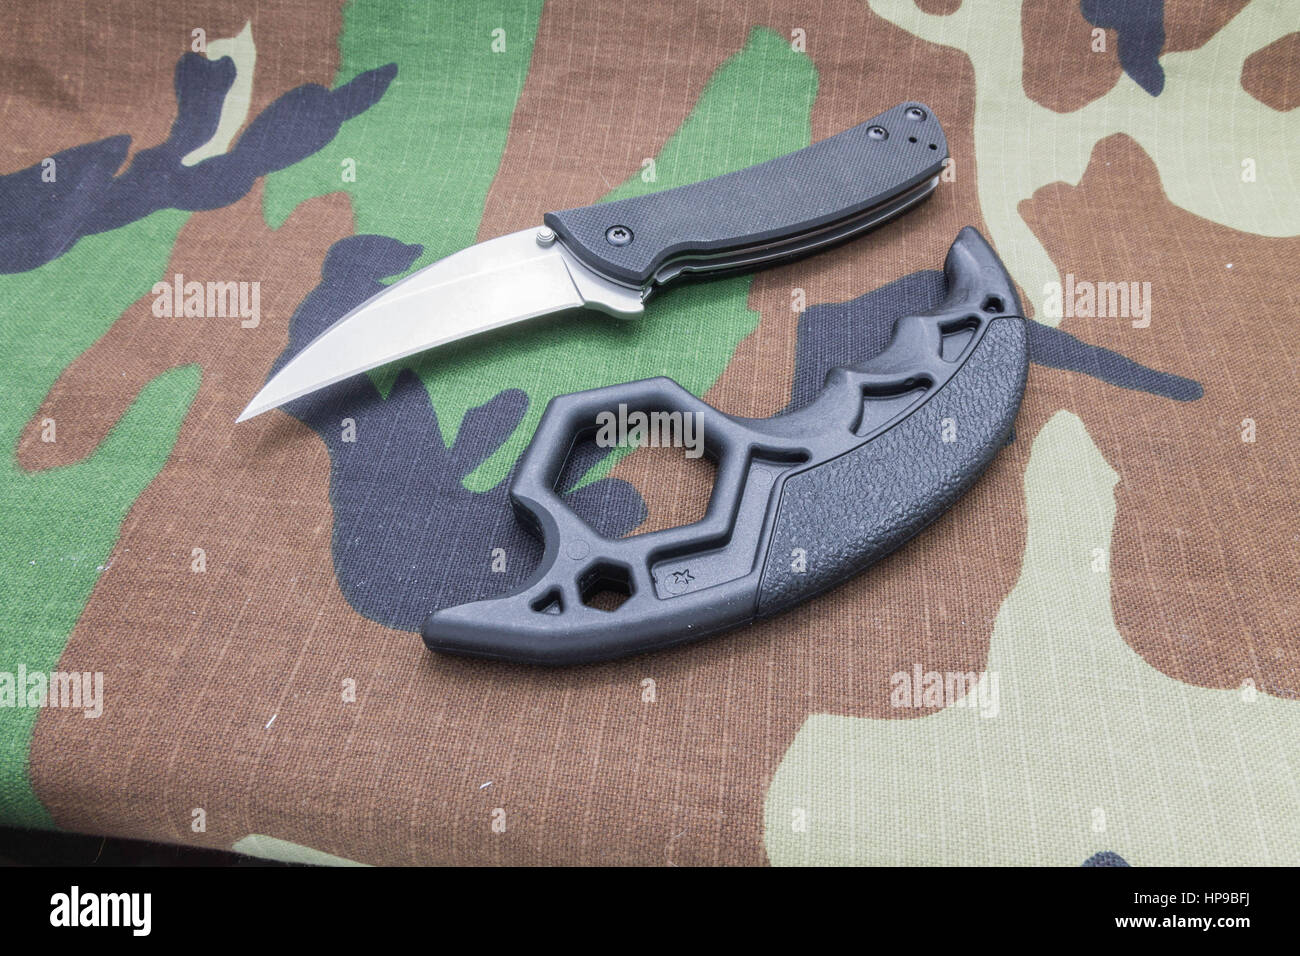 https://c8.alamy.com/comp/HP9BFJ/knife-and-brass-knuckles-on-a-camouflage-background-tools-for-self-HP9BFJ.jpg